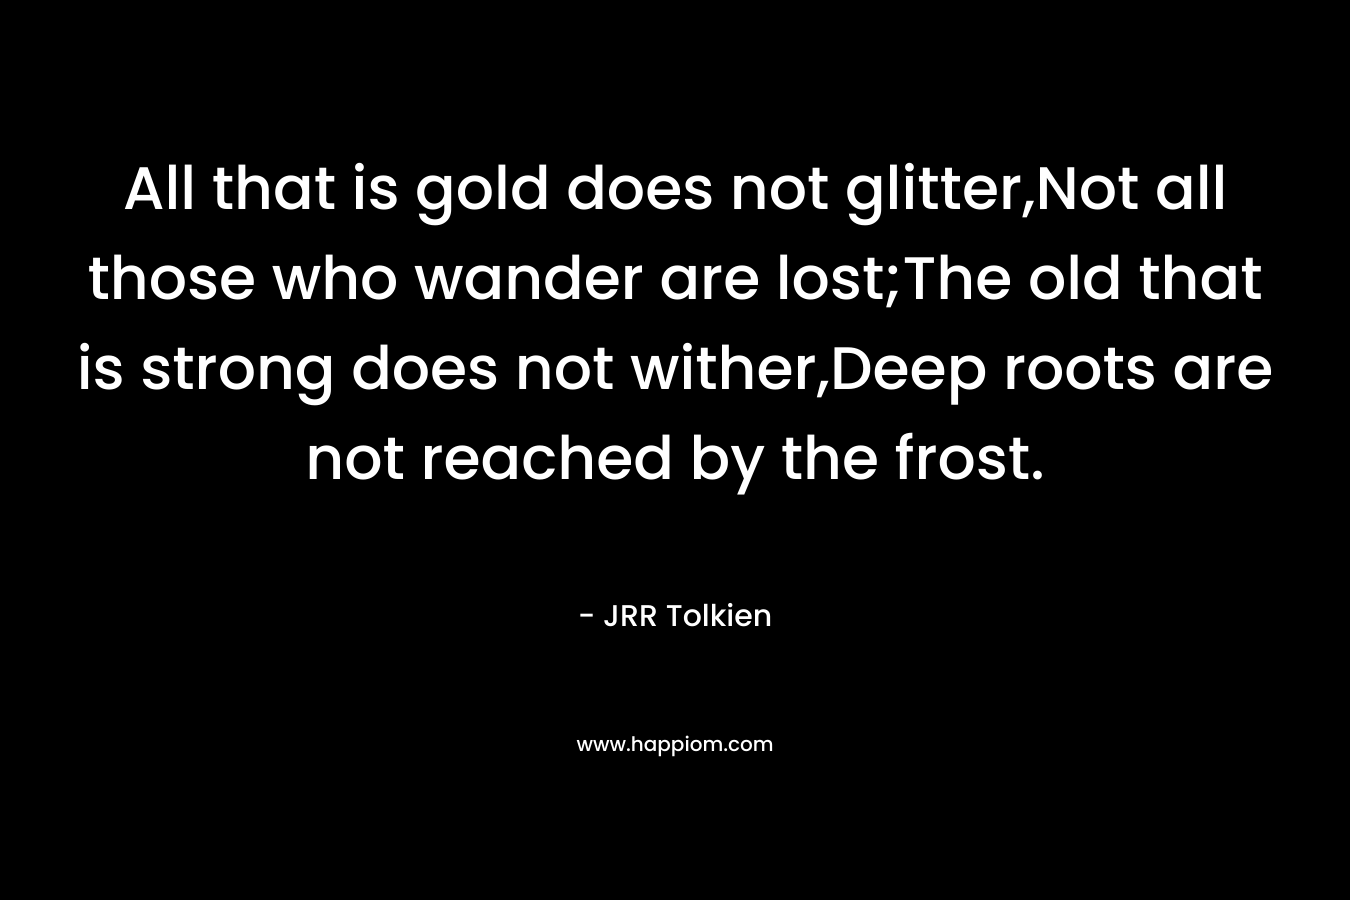 All that is gold does not glitter,Not all those who wander are lost;The old that is strong does not wither,Deep roots are not reached by the frost.